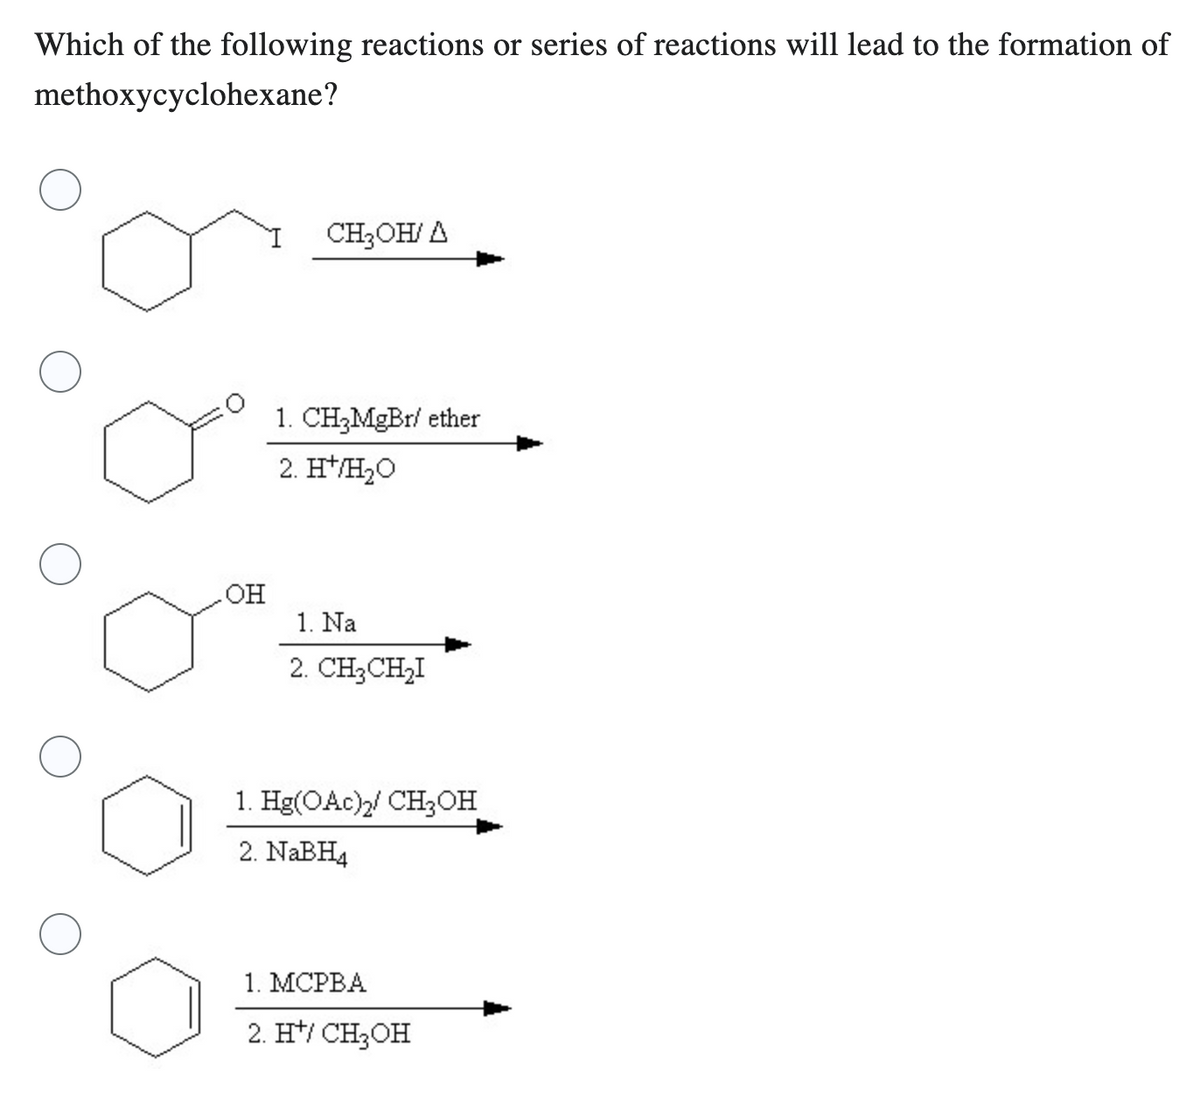 Which of the following reactions or series of reactions will lead to the formation of
methoxycyclohexane?
OH
CH₂OH/A
1. CH3MgBr/ ether
2. H*/H₂O
1. Na
2. CH₂CH₂I
1. Hg(OAc)2/ CH₂OH
2. NaBH4
1. MCPBA
2. H¹/ CH₂OH